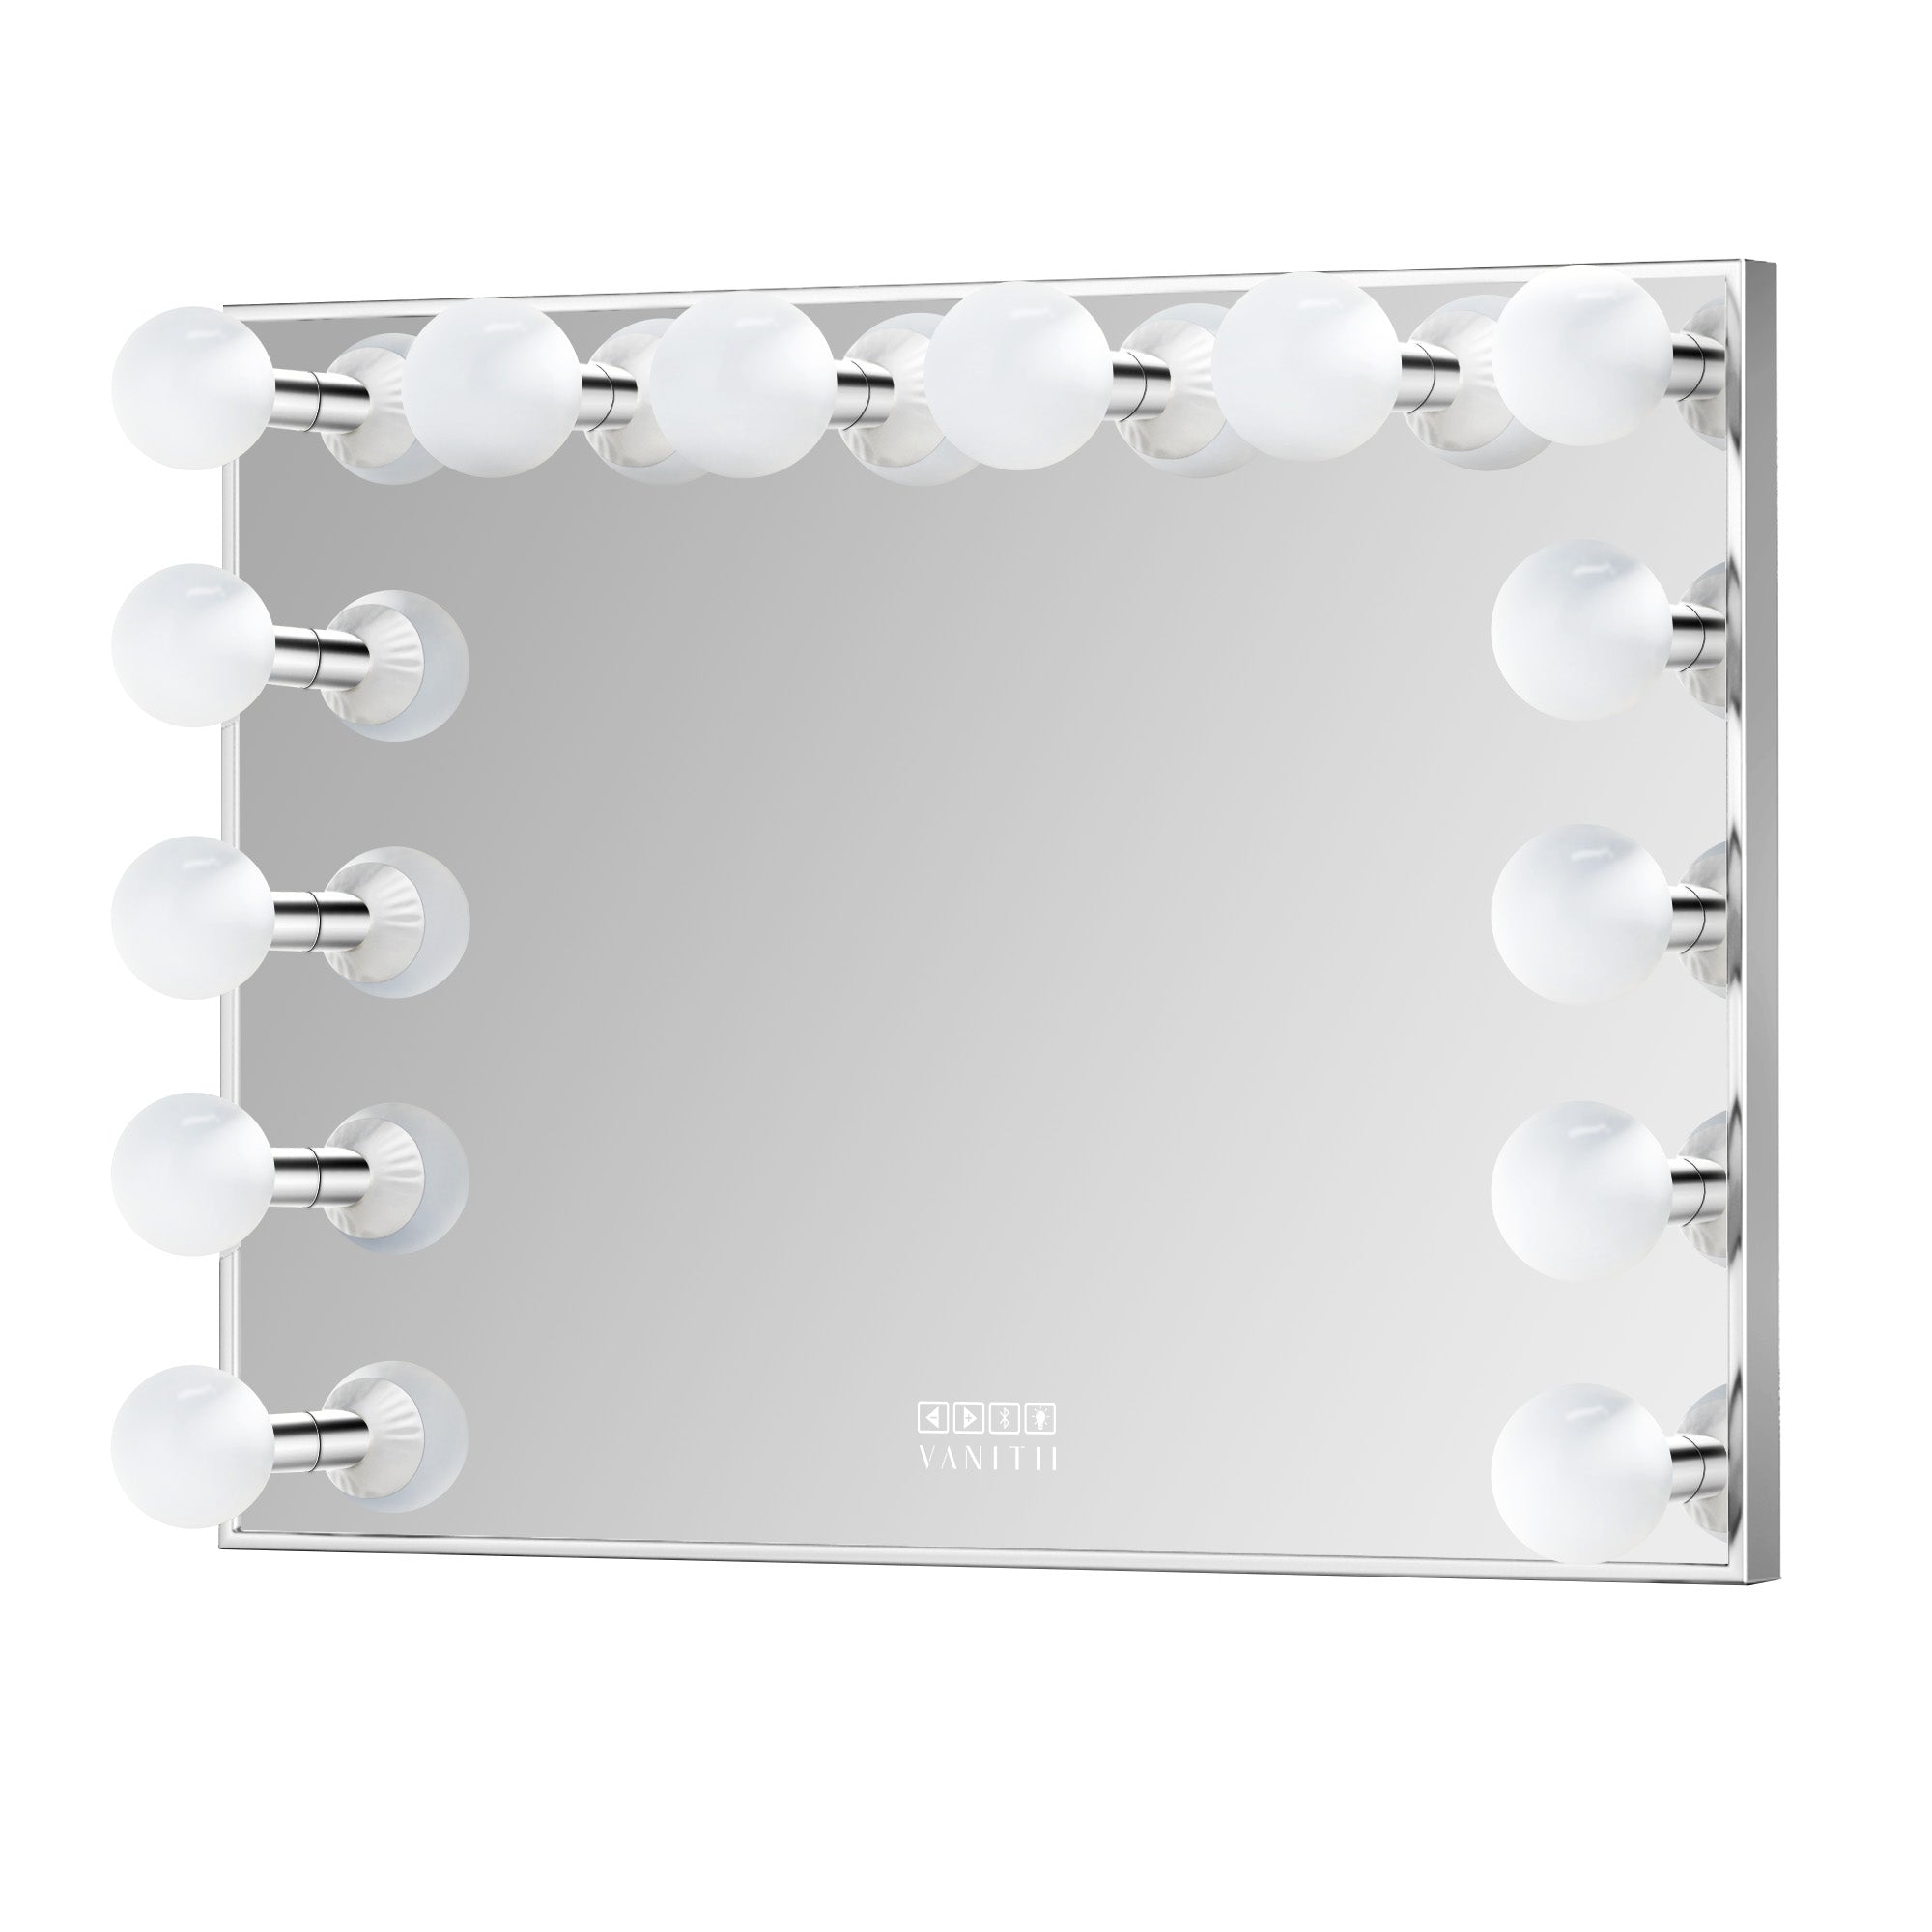 VANITII Chanel Silver Hollywood Vanity Mirror - 14 Dimmable LED Bulbs